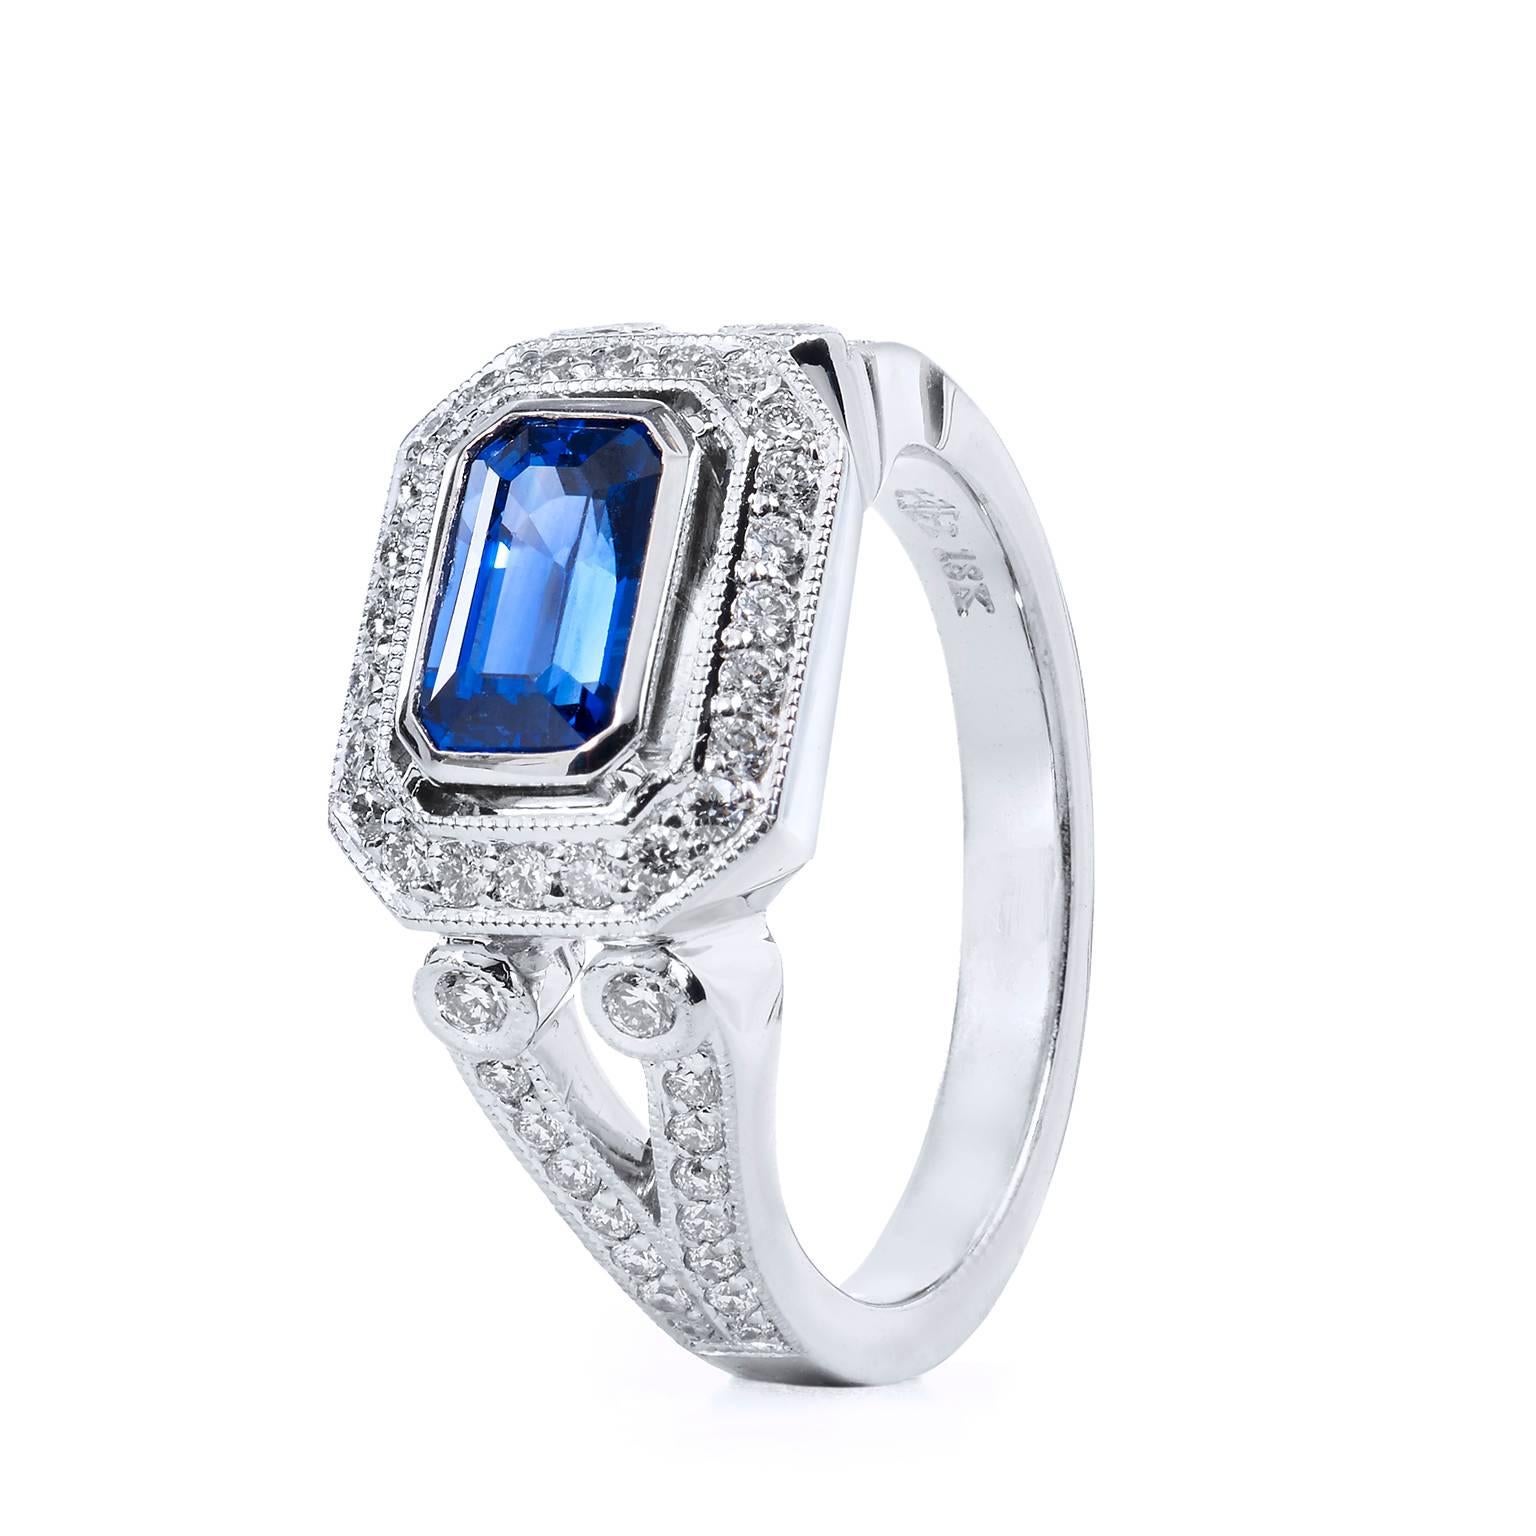 1.35 ct Vivid Blue Madagascar Sapphire & Diamond 18 karat Gold & Palladium Ring

This stunning ring is a handcrafted and one of a kind, made by H&H Jewels.  It is forged in 18 karat gold & palladium, this ring features a vivid blue Madagascar